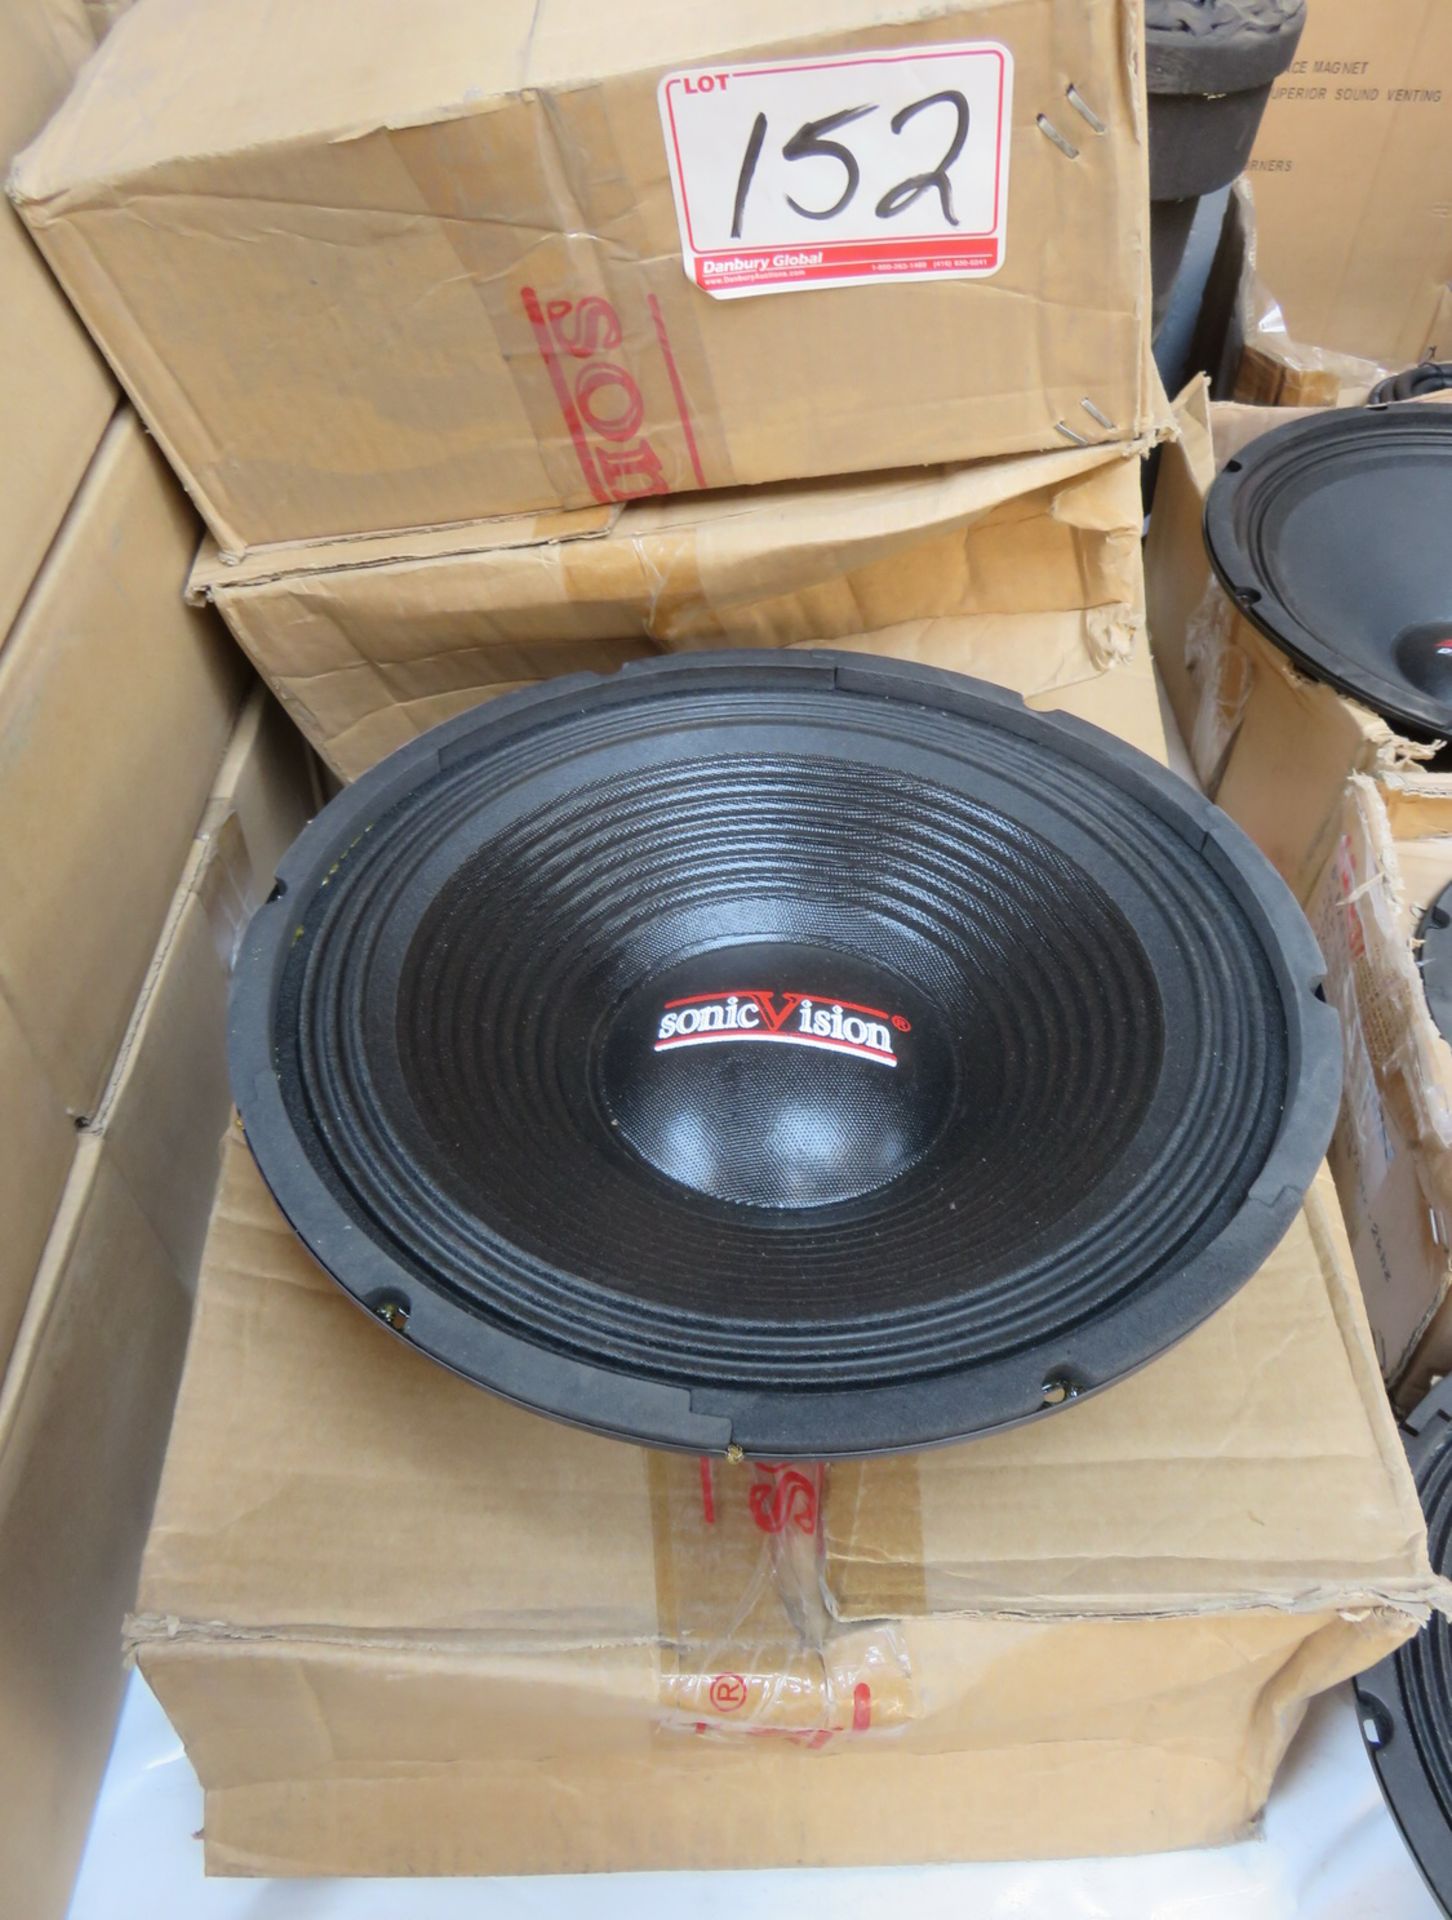 LOT - SONIC VISION 12" SPEAKERS (5PC)